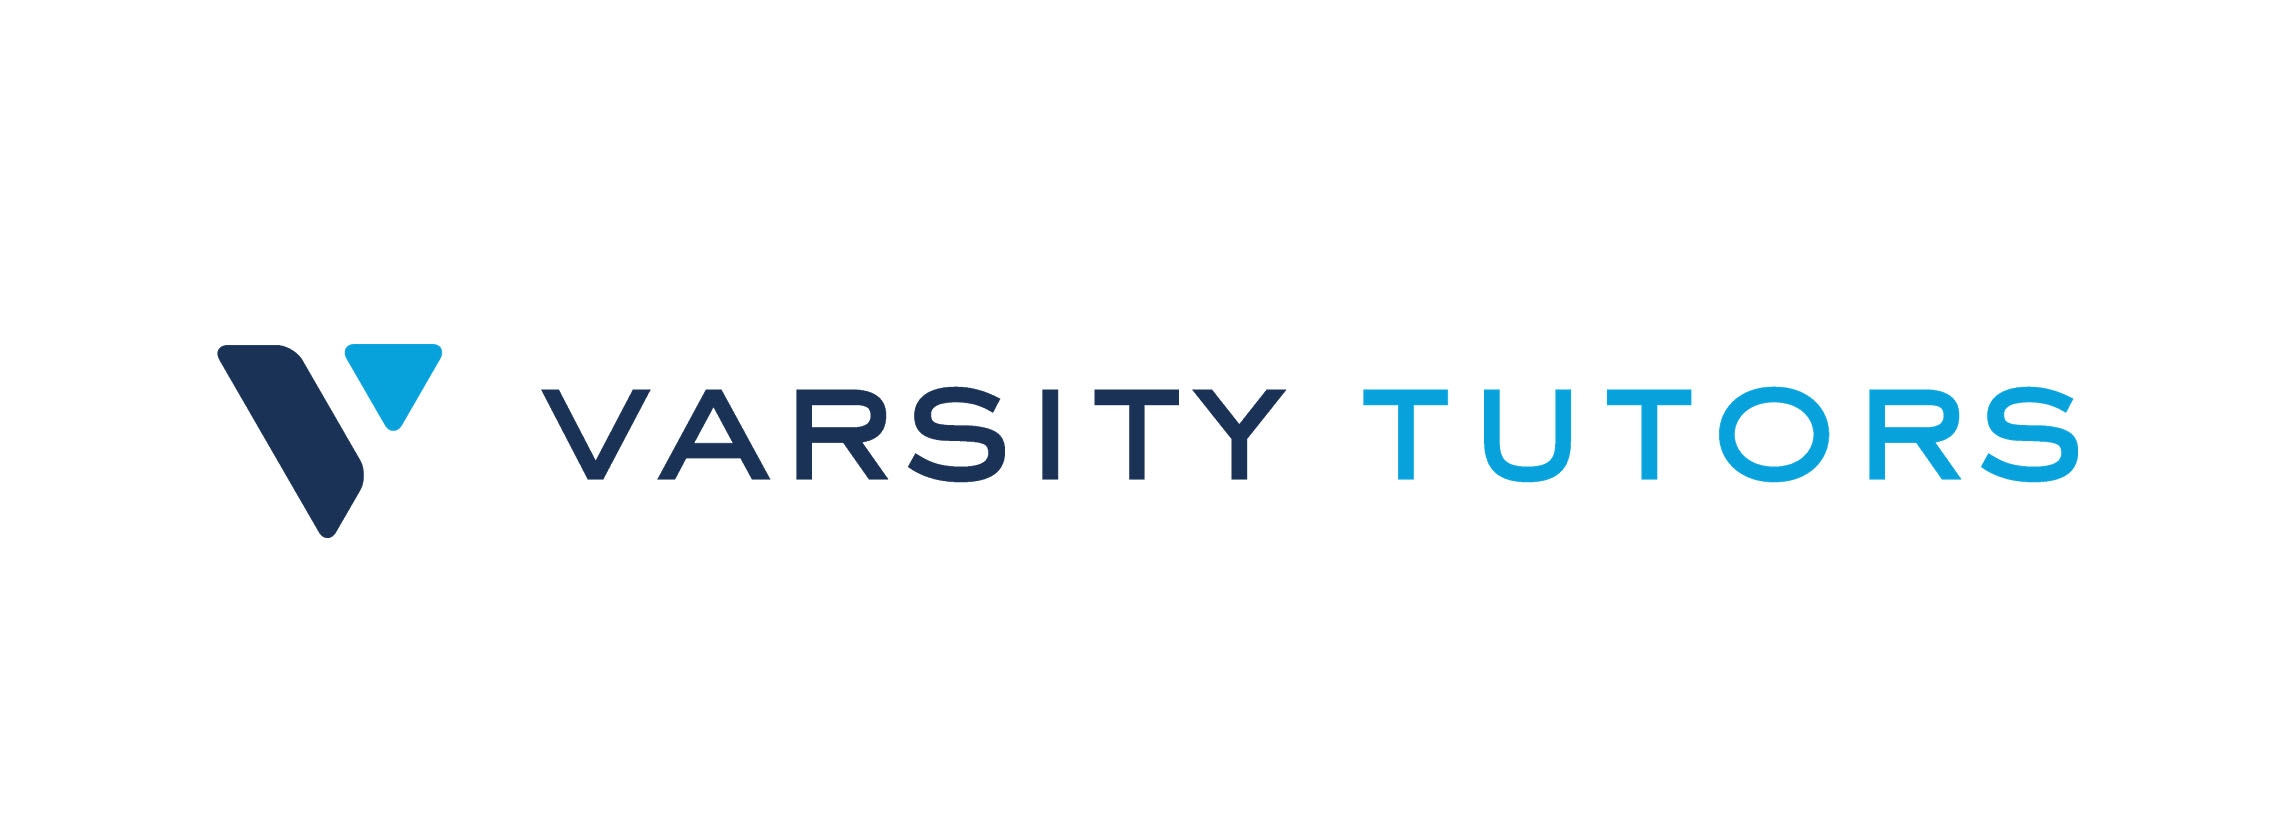 Varsity Tutors Initiates Global Expansion with Acquisition of First Tutors